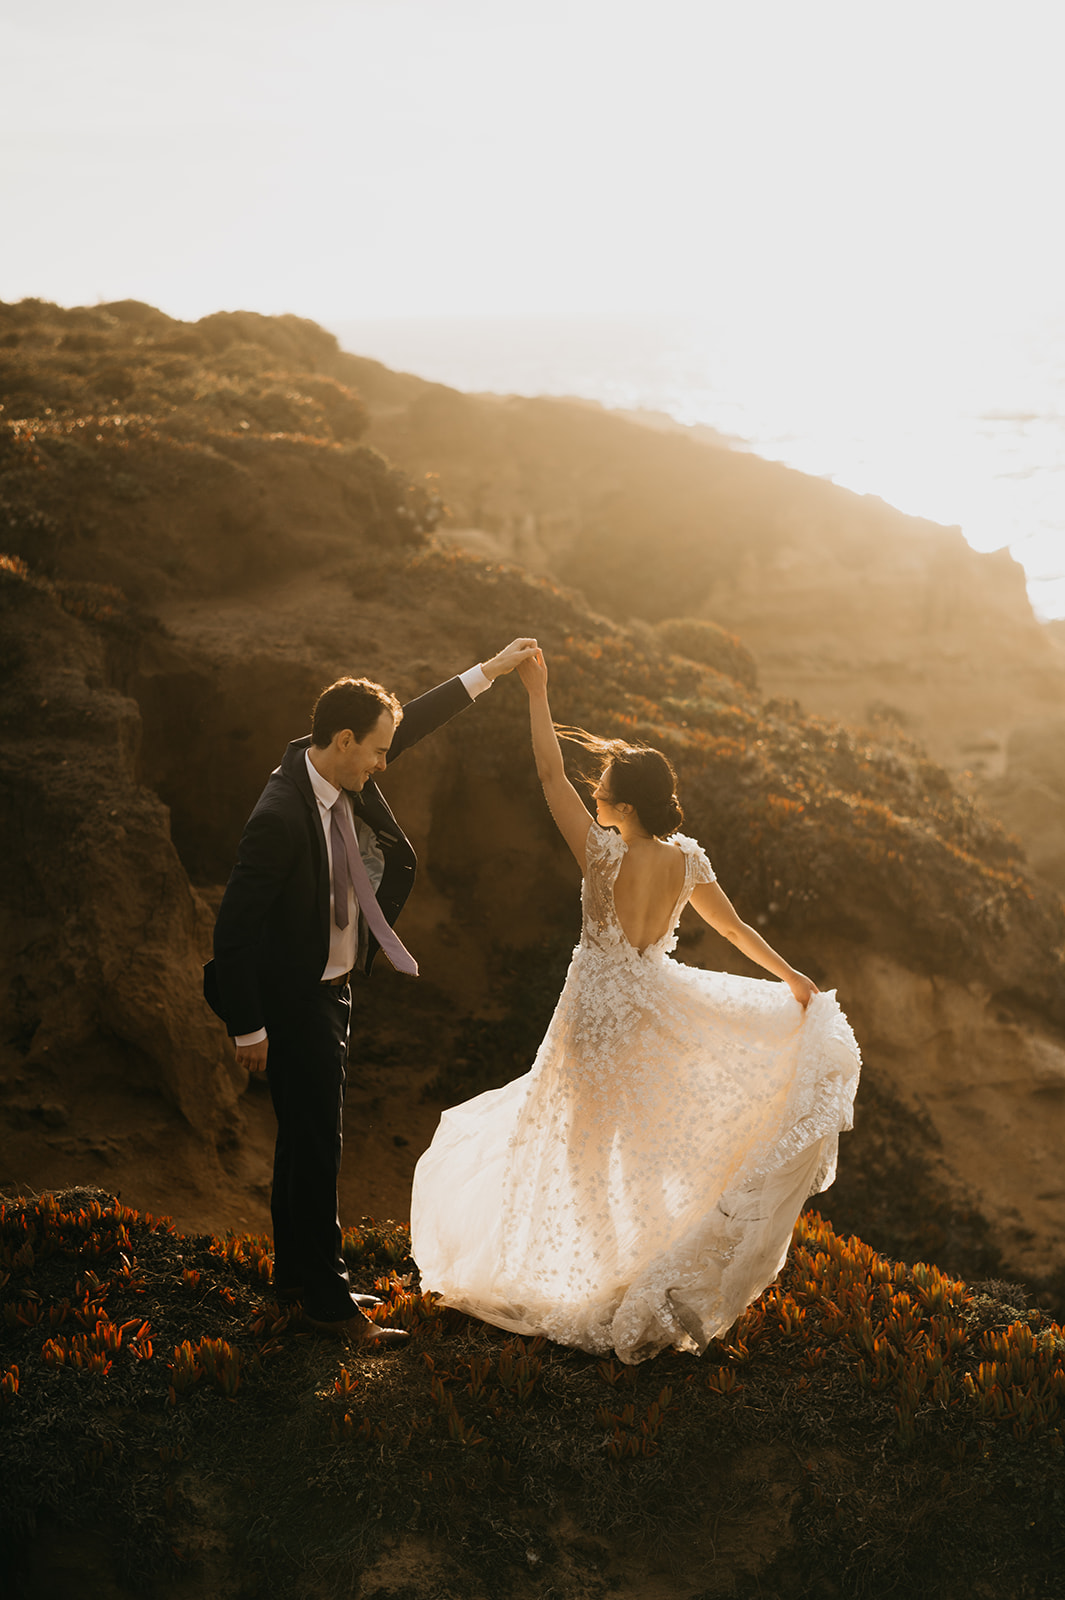 Bride and groom dancing in the sunset on a cliff in Big Sur California.